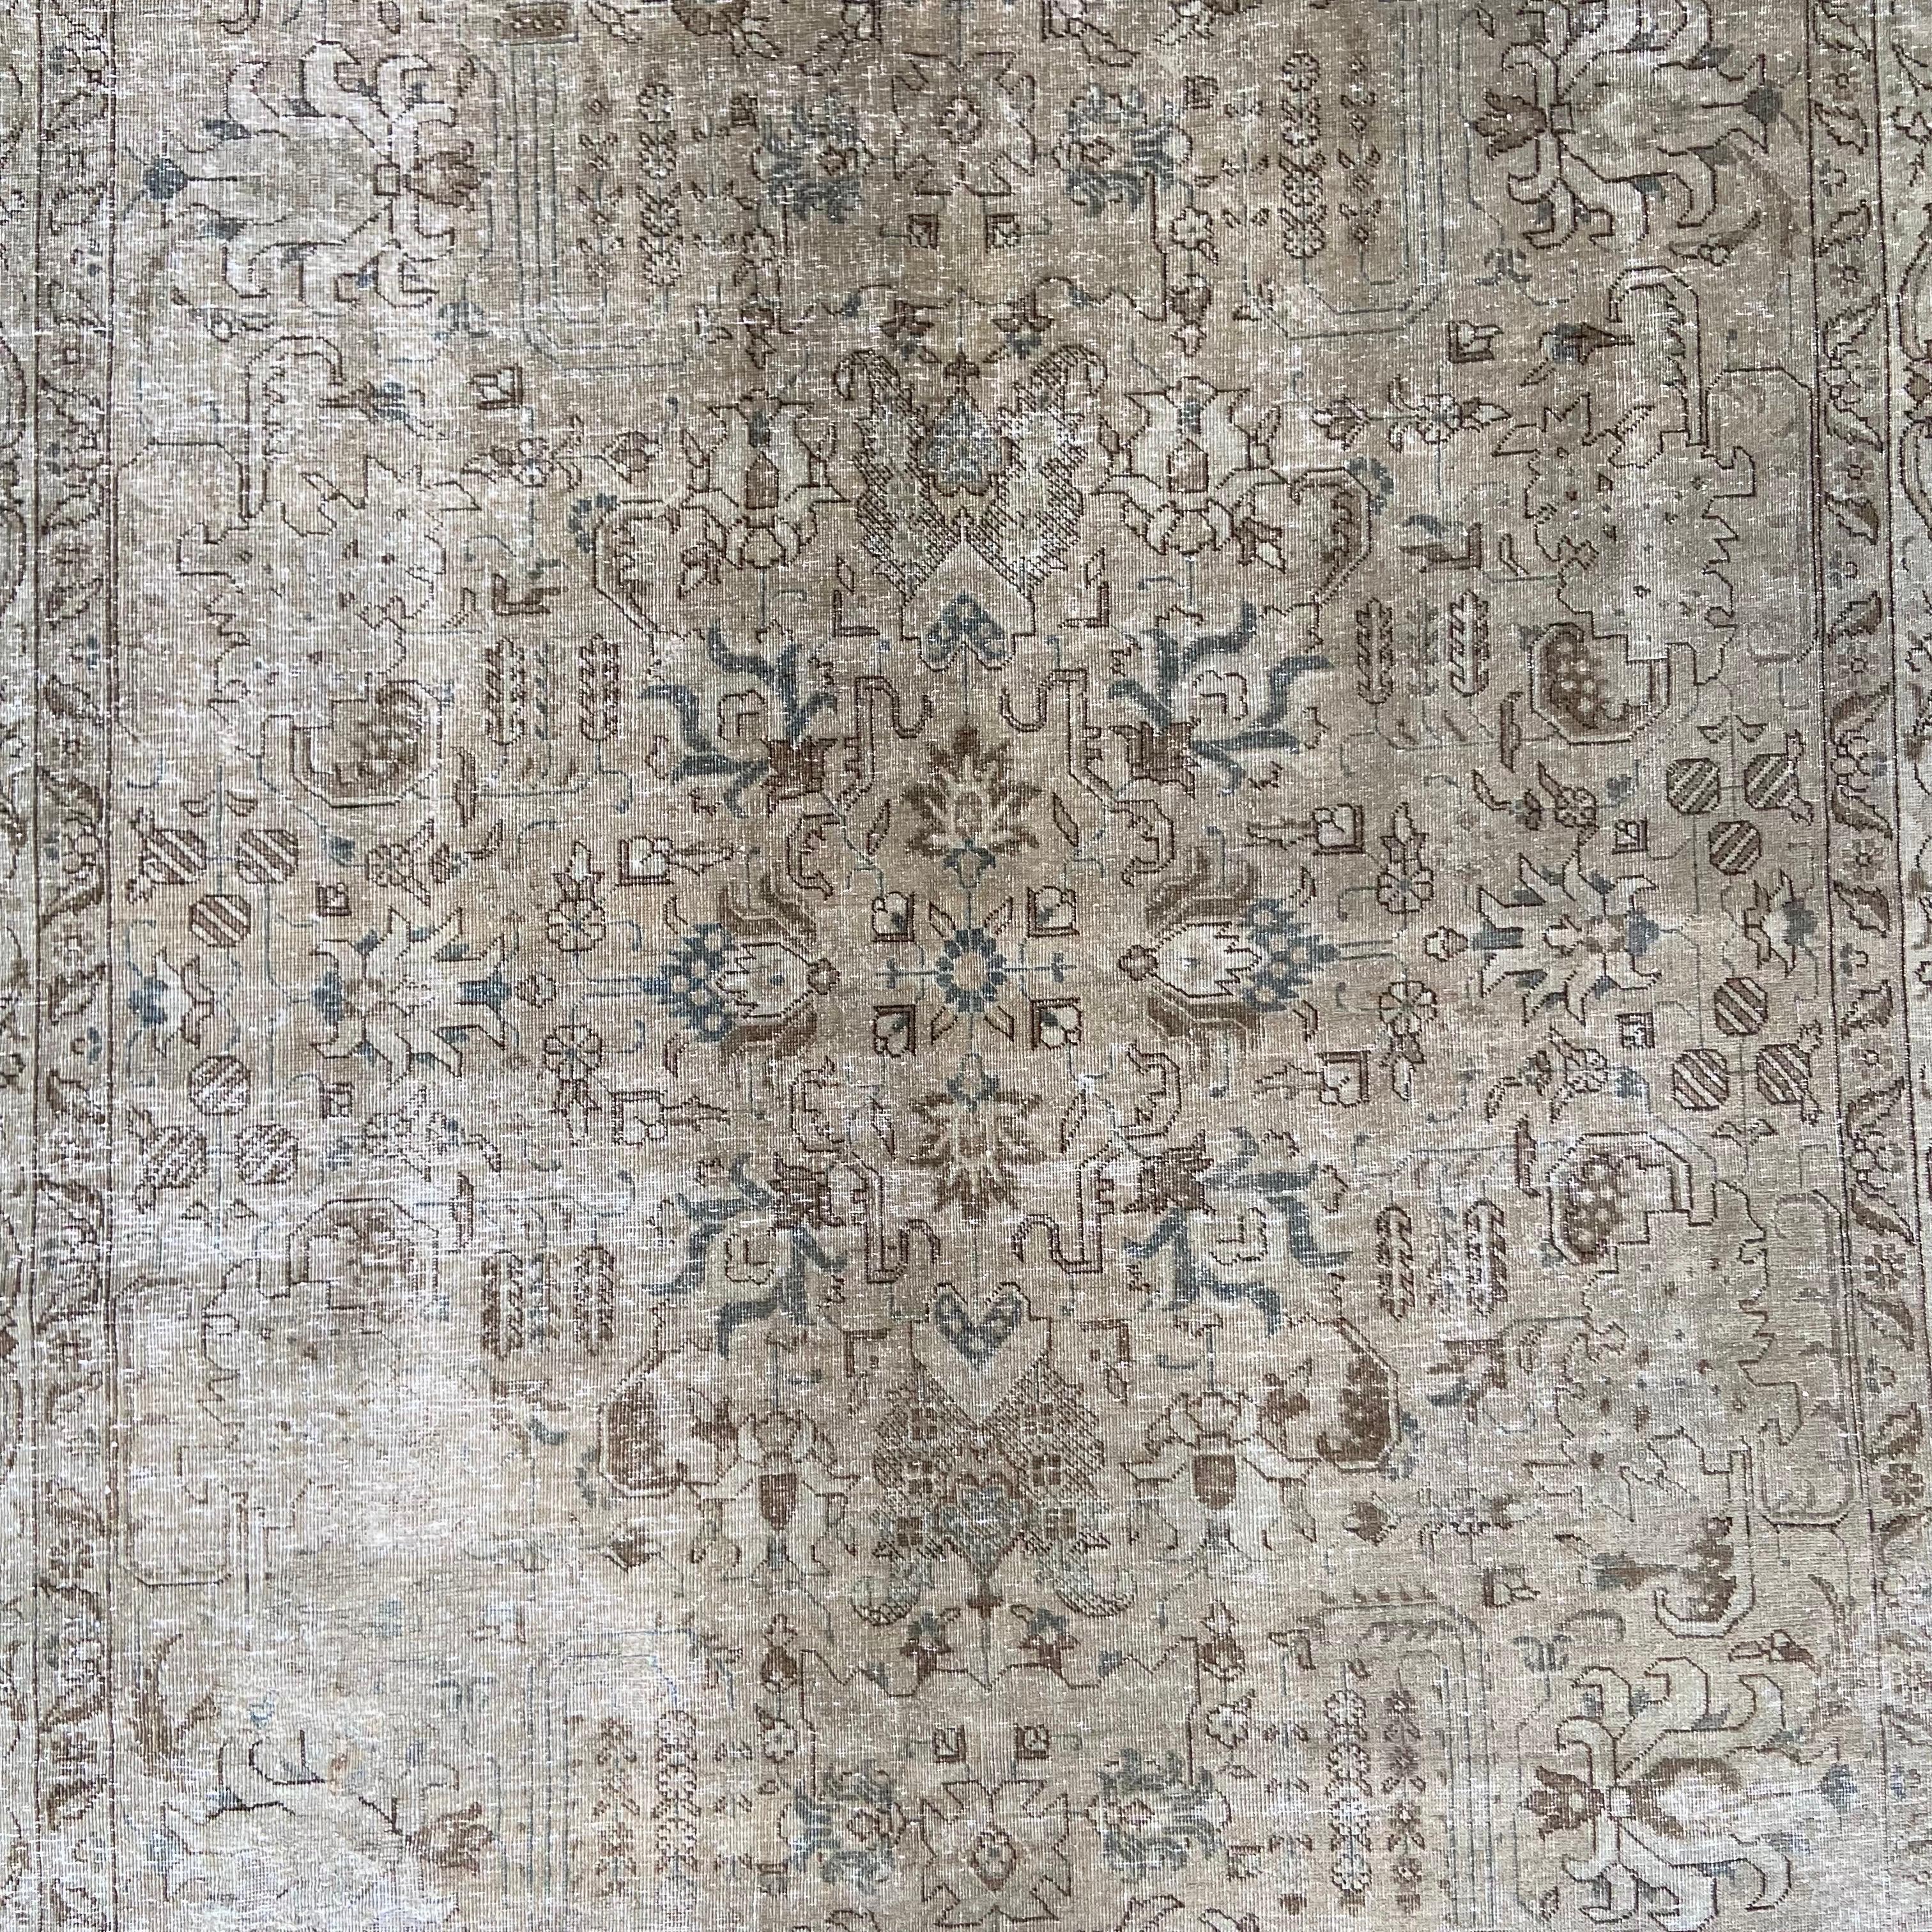 Vintage rug 80” x 120”
The warm colors as well as intricate patterns not only adds character but also makes it truly one-of-a-kind. Some pattern and color variation with vintage items is normal. Beautiful rug has a deep oiled look with colors